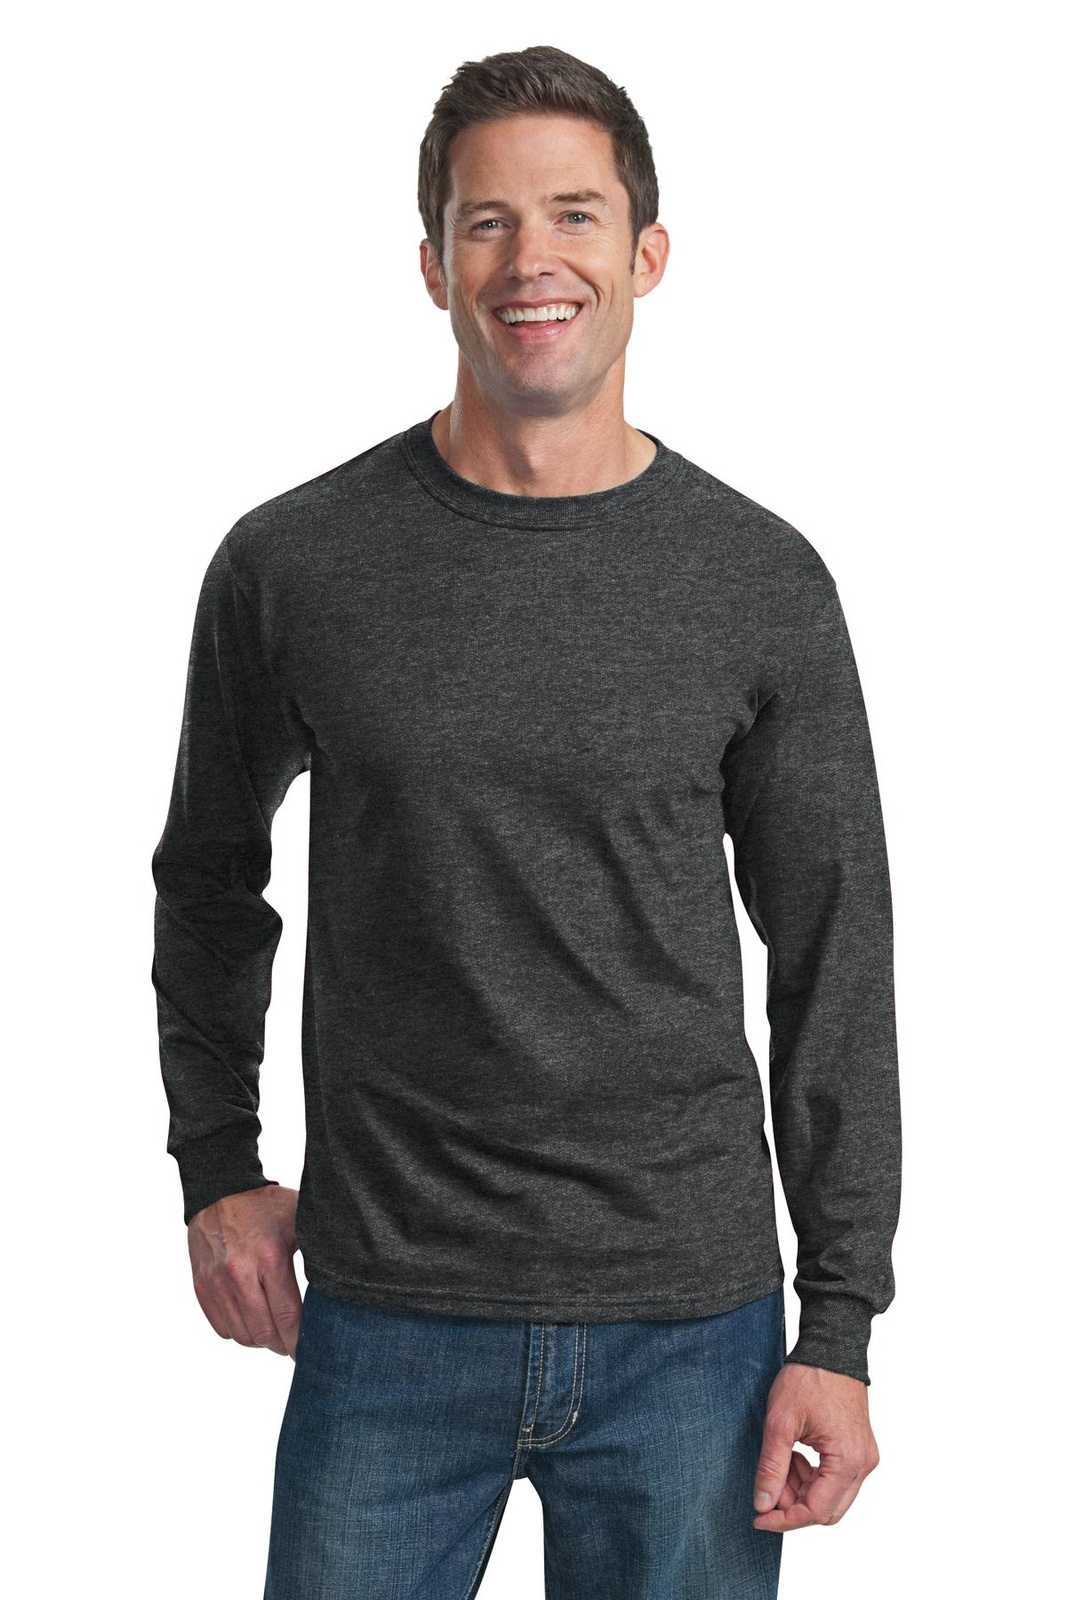 Fruit of the Loom 4930 HD Cotton 100% Cotton Long Sleeve T-Shirt - Black Heather - HIT a Double